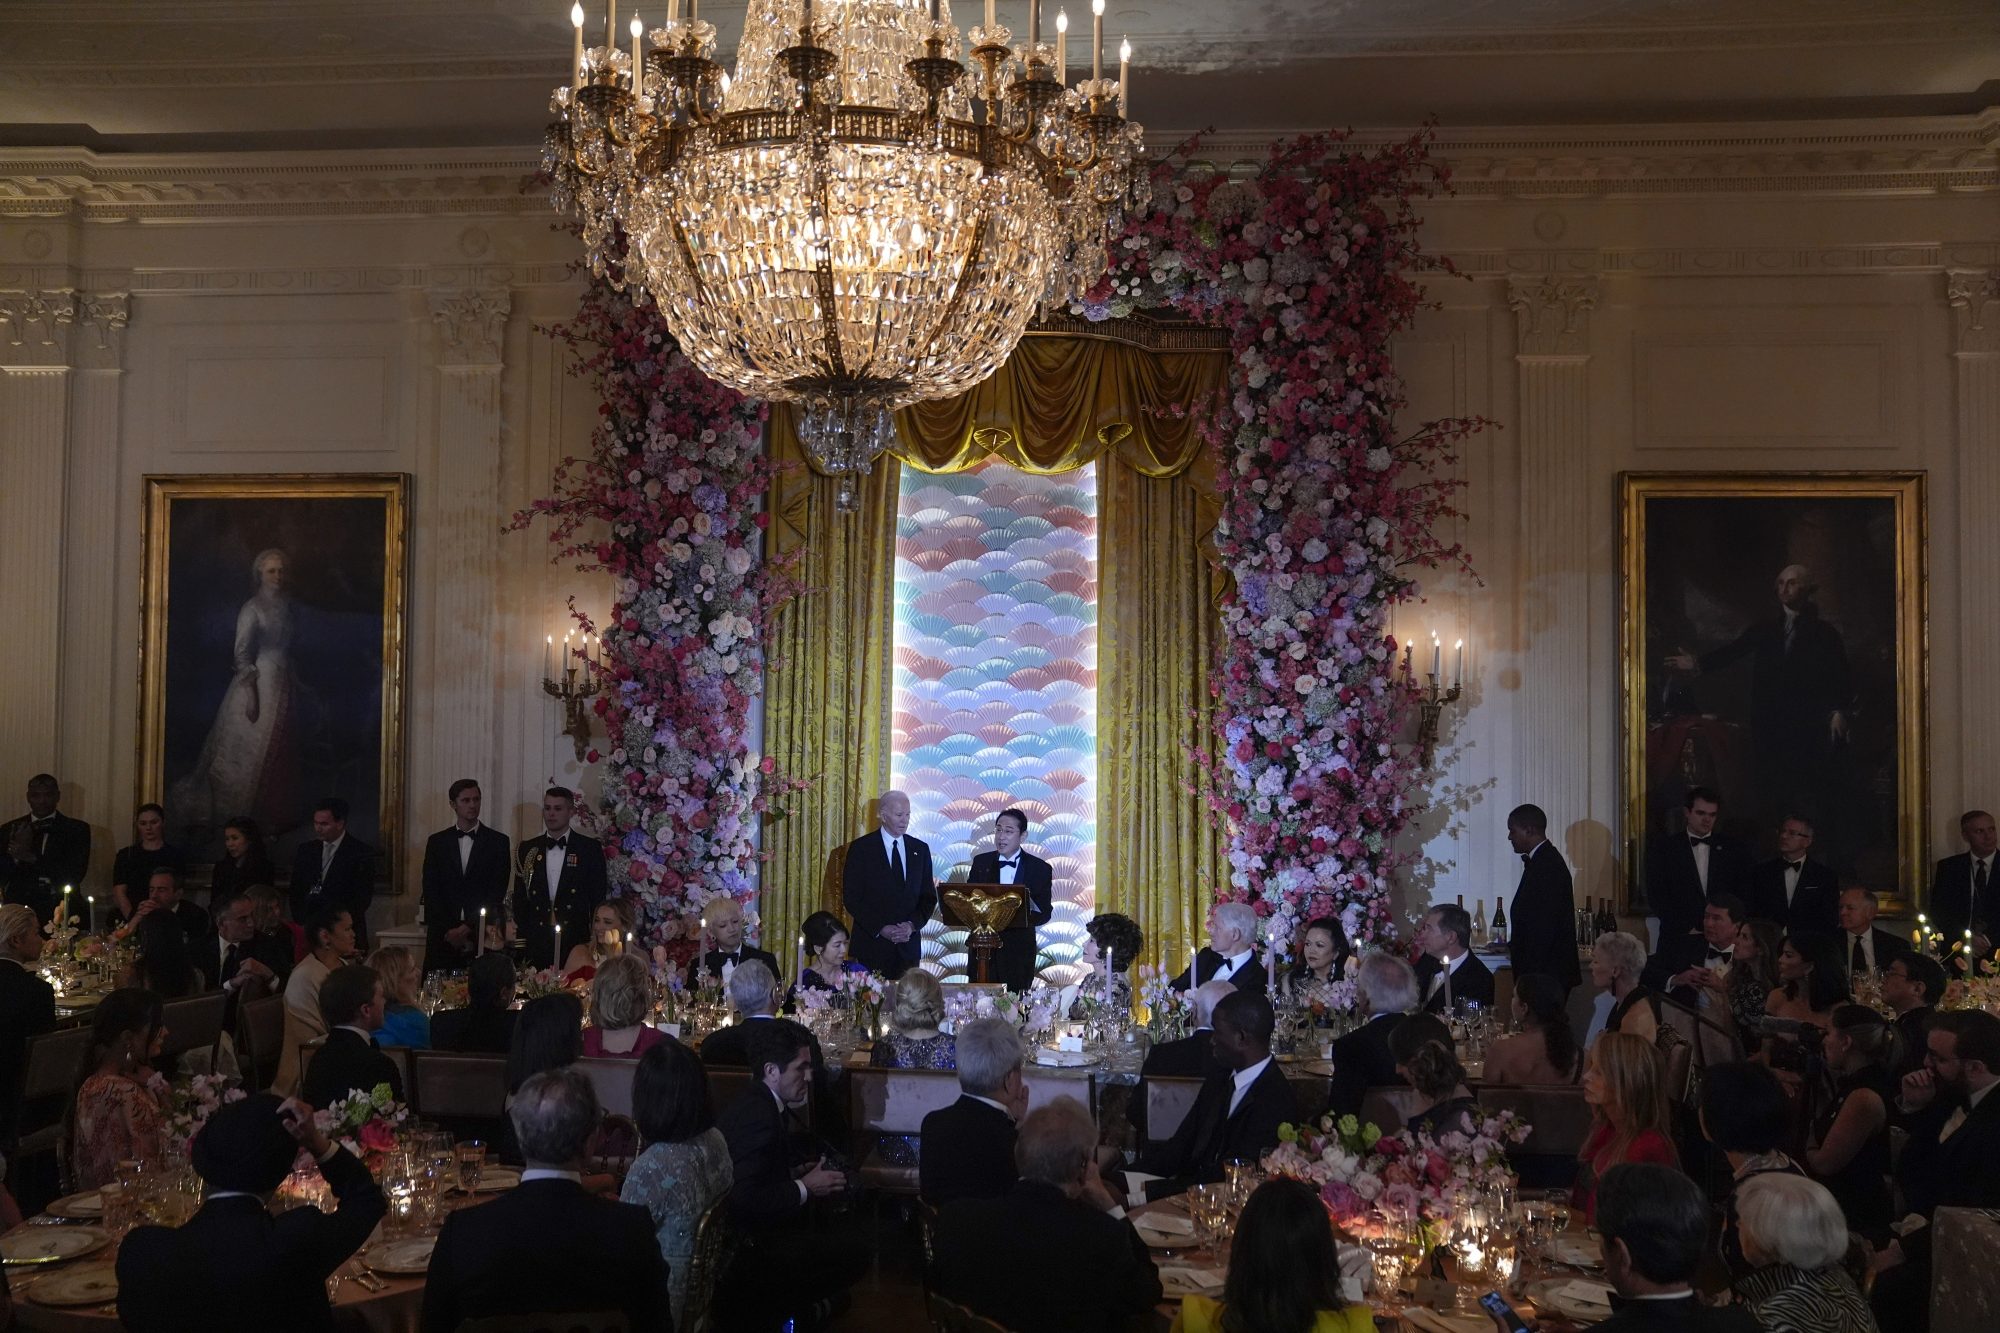 Kishida speaks ahead of a toast during a State Dinner at the White House.